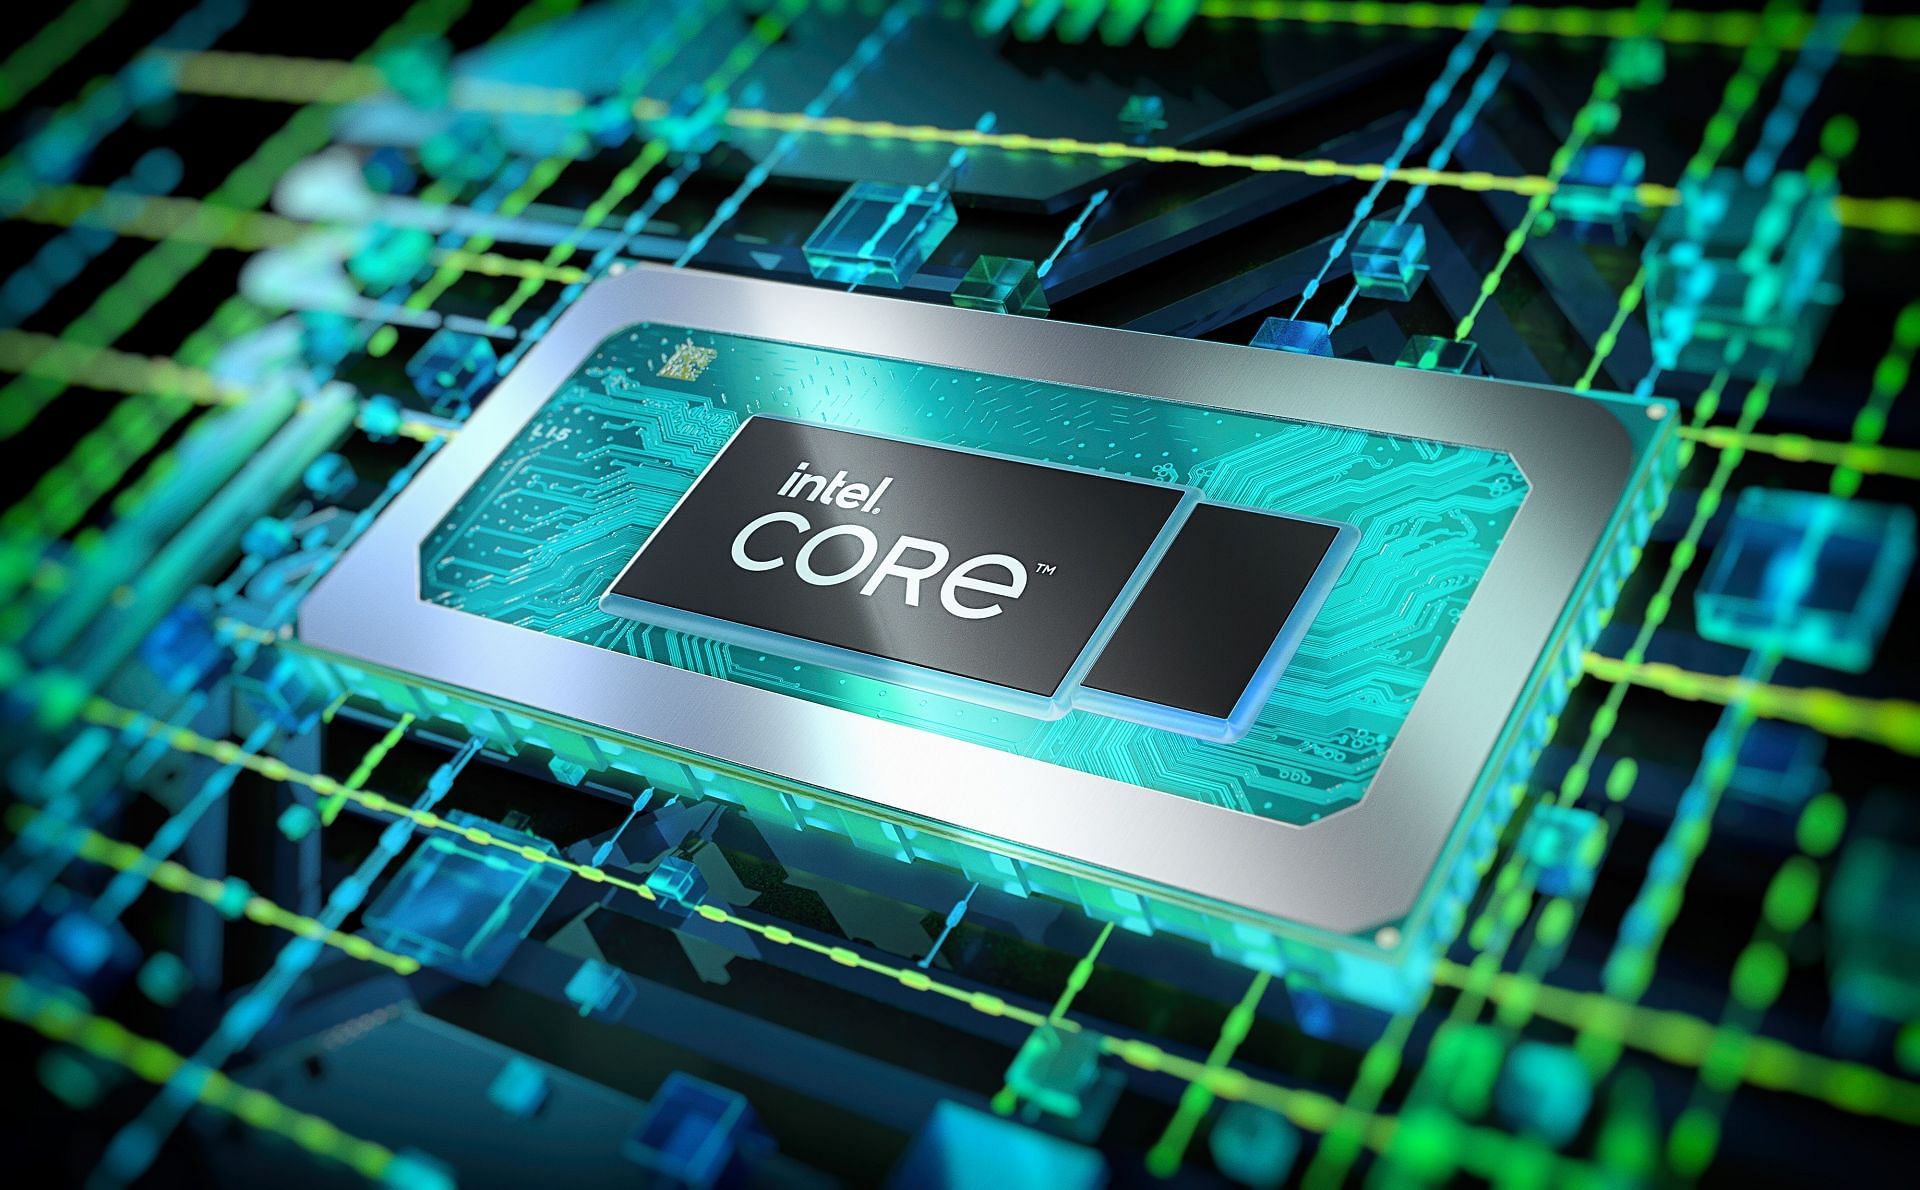 Intel offers the best CPUs at affordable prices (Image via Intel)